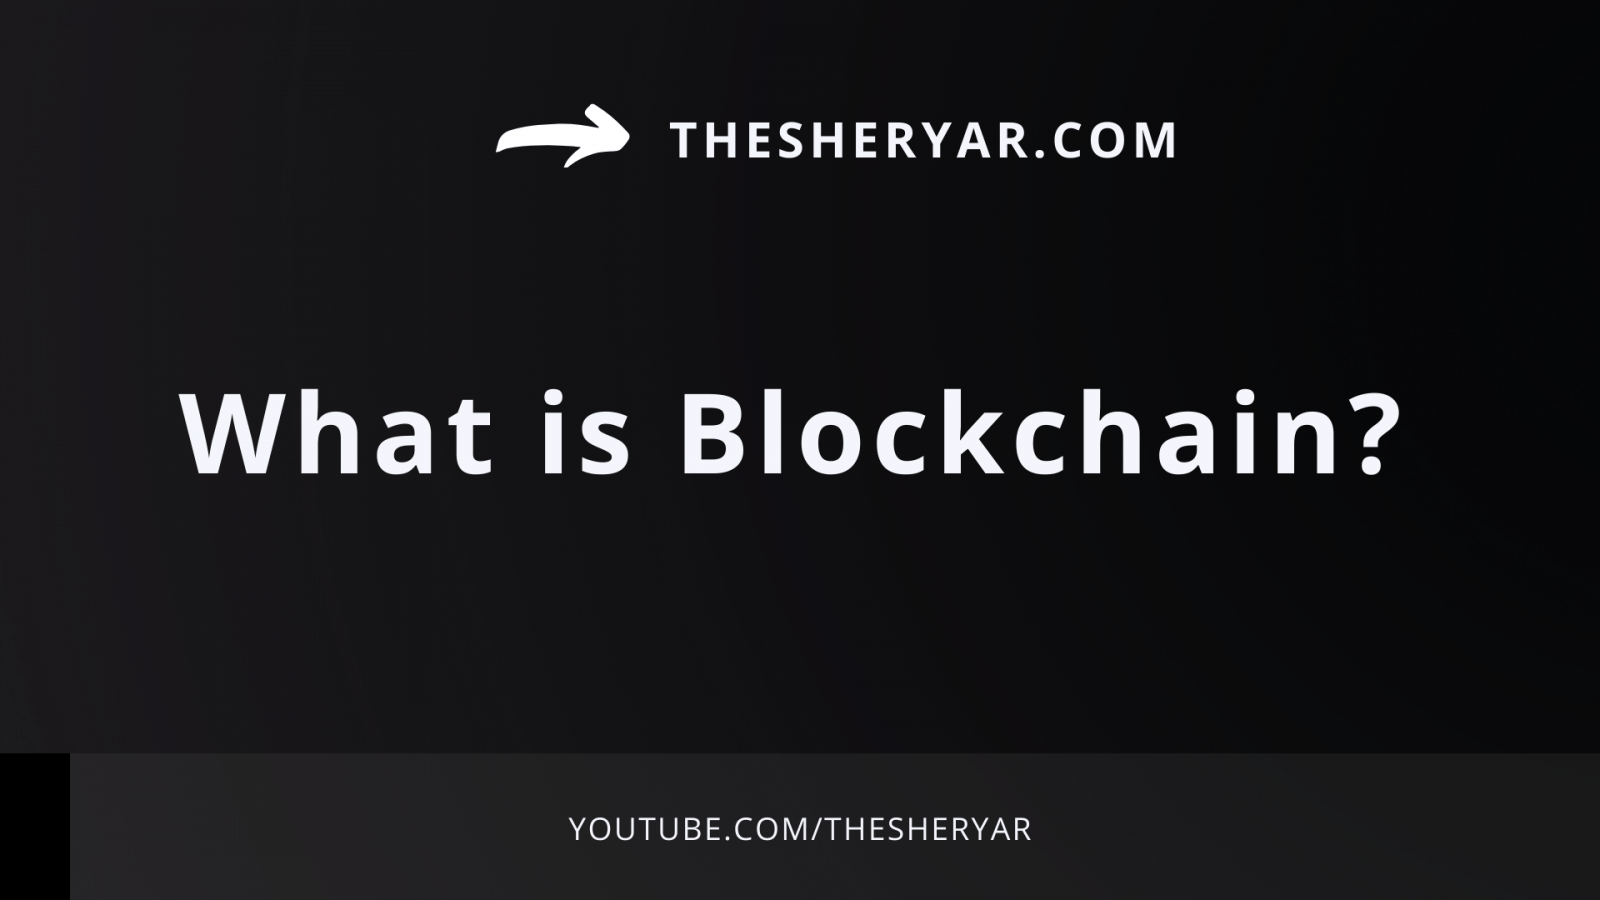 Image with text of blockchain